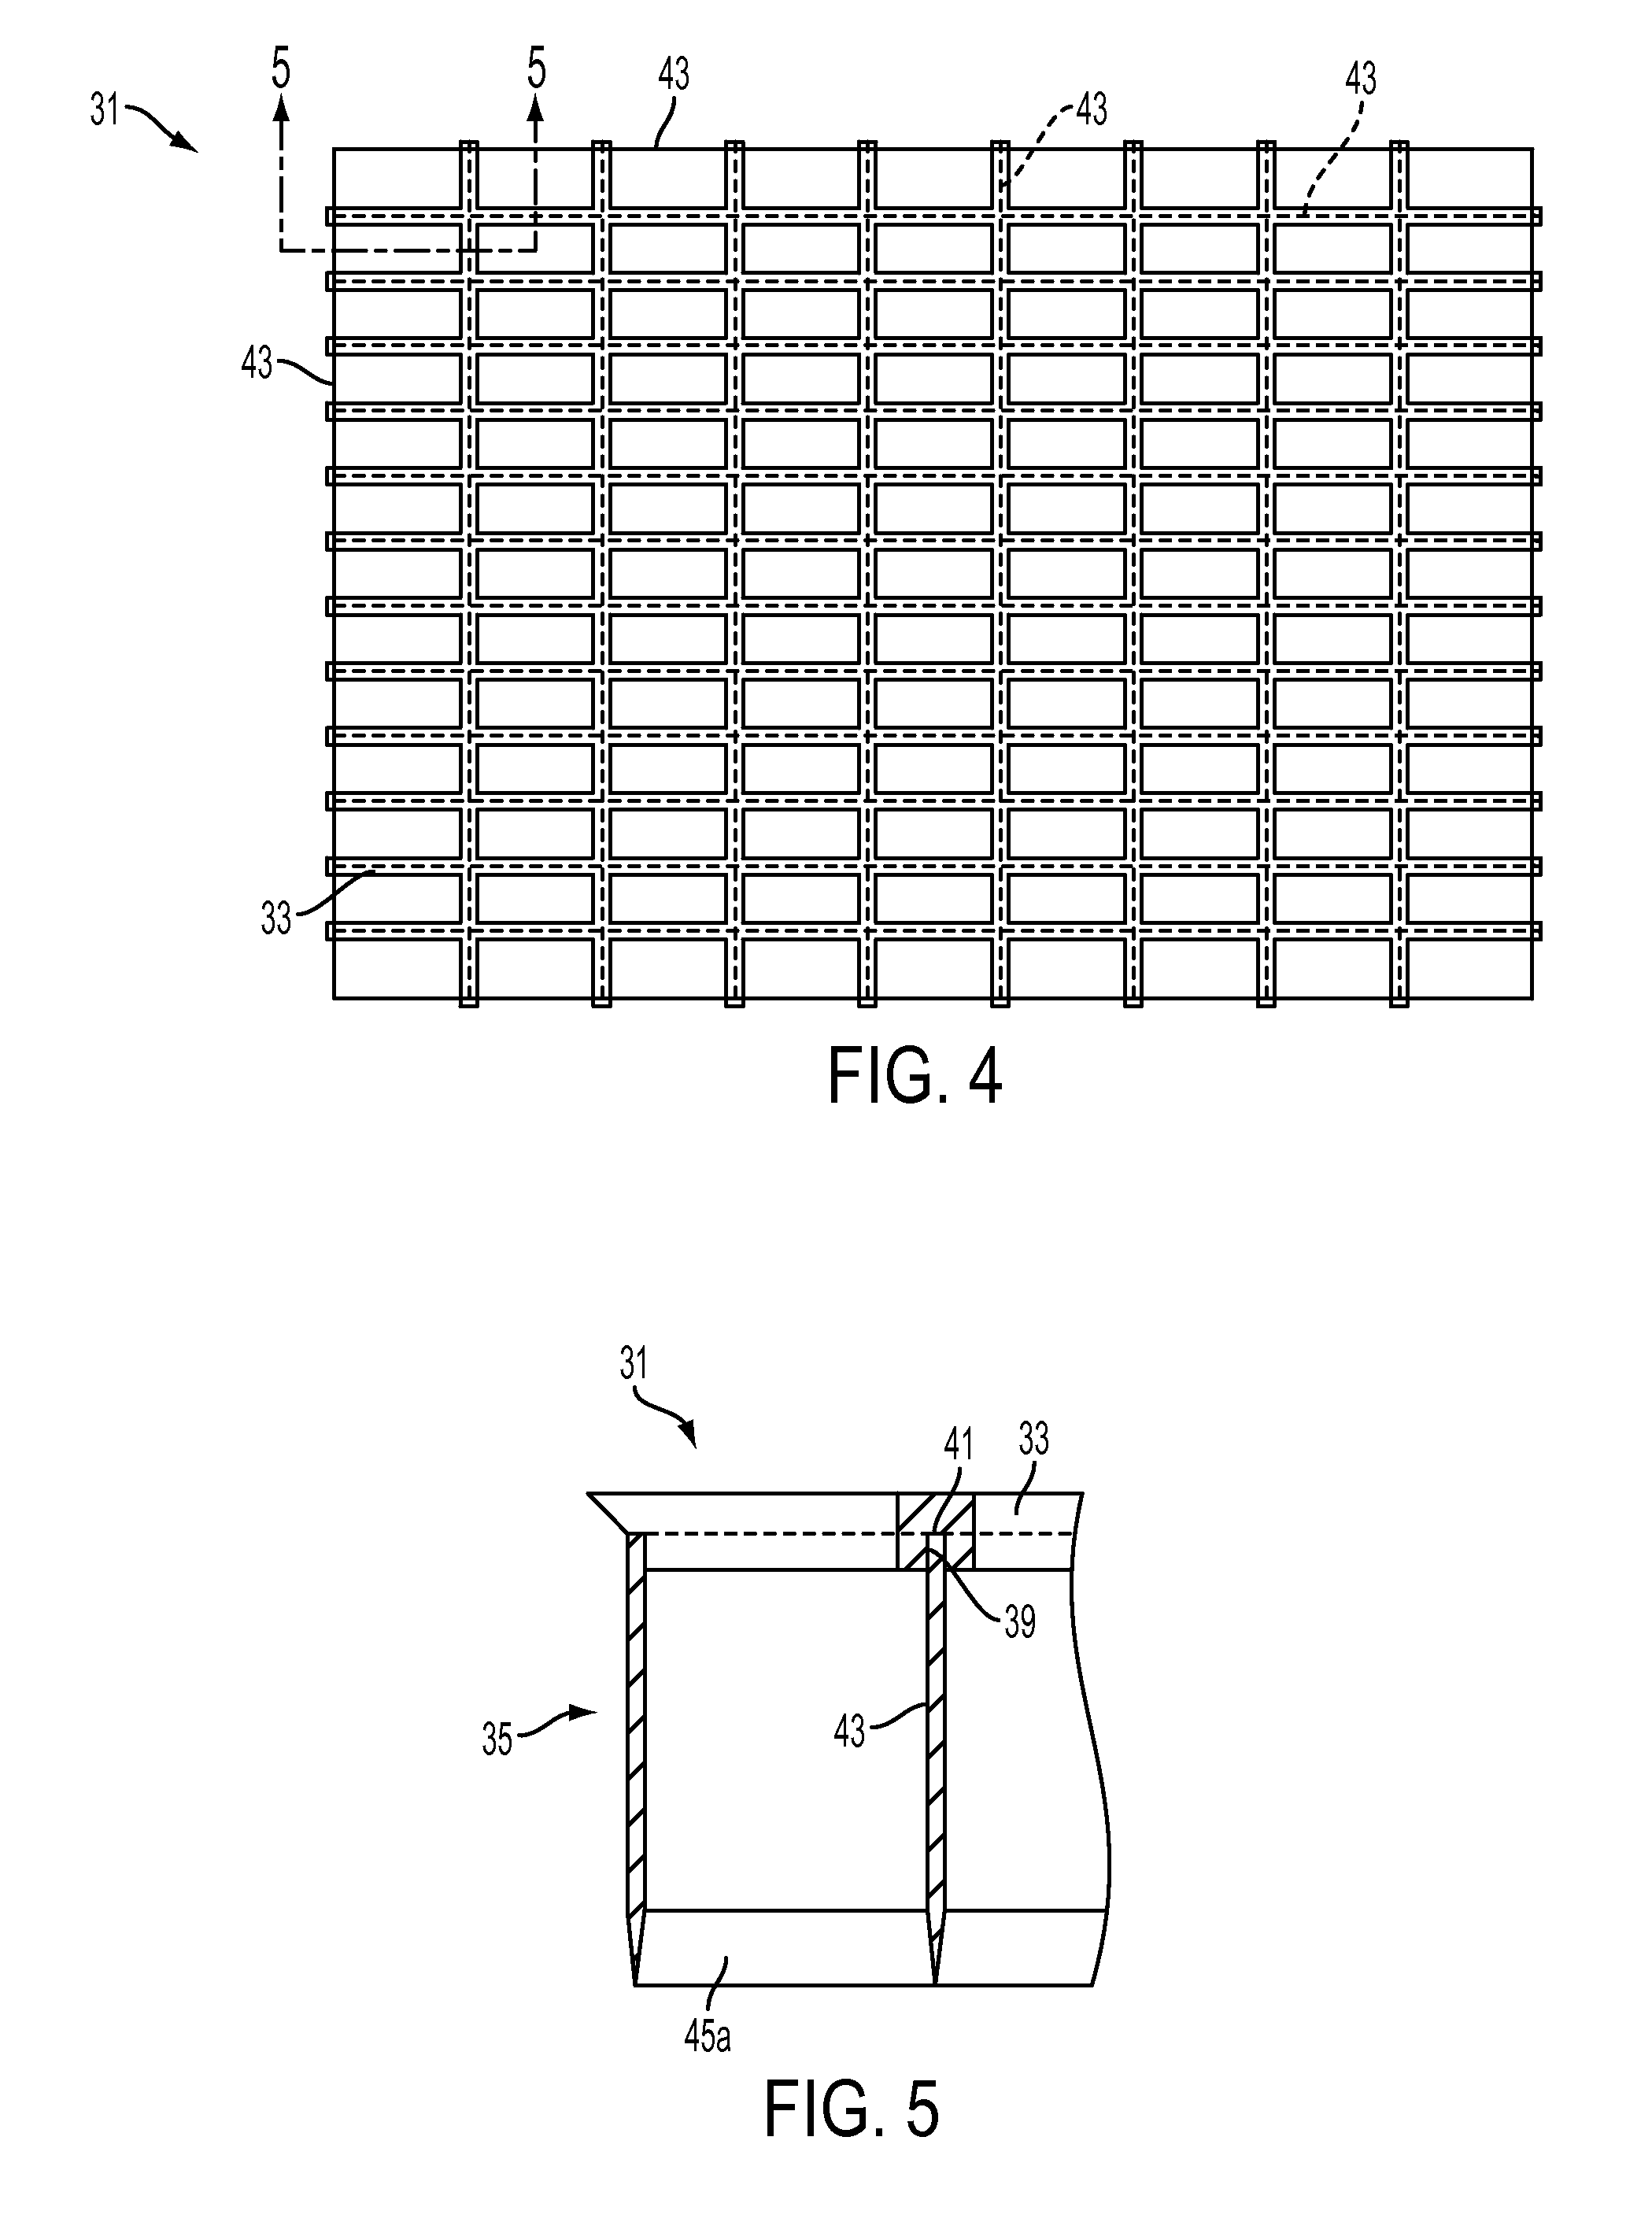 System, method and apparatus for cutting foods